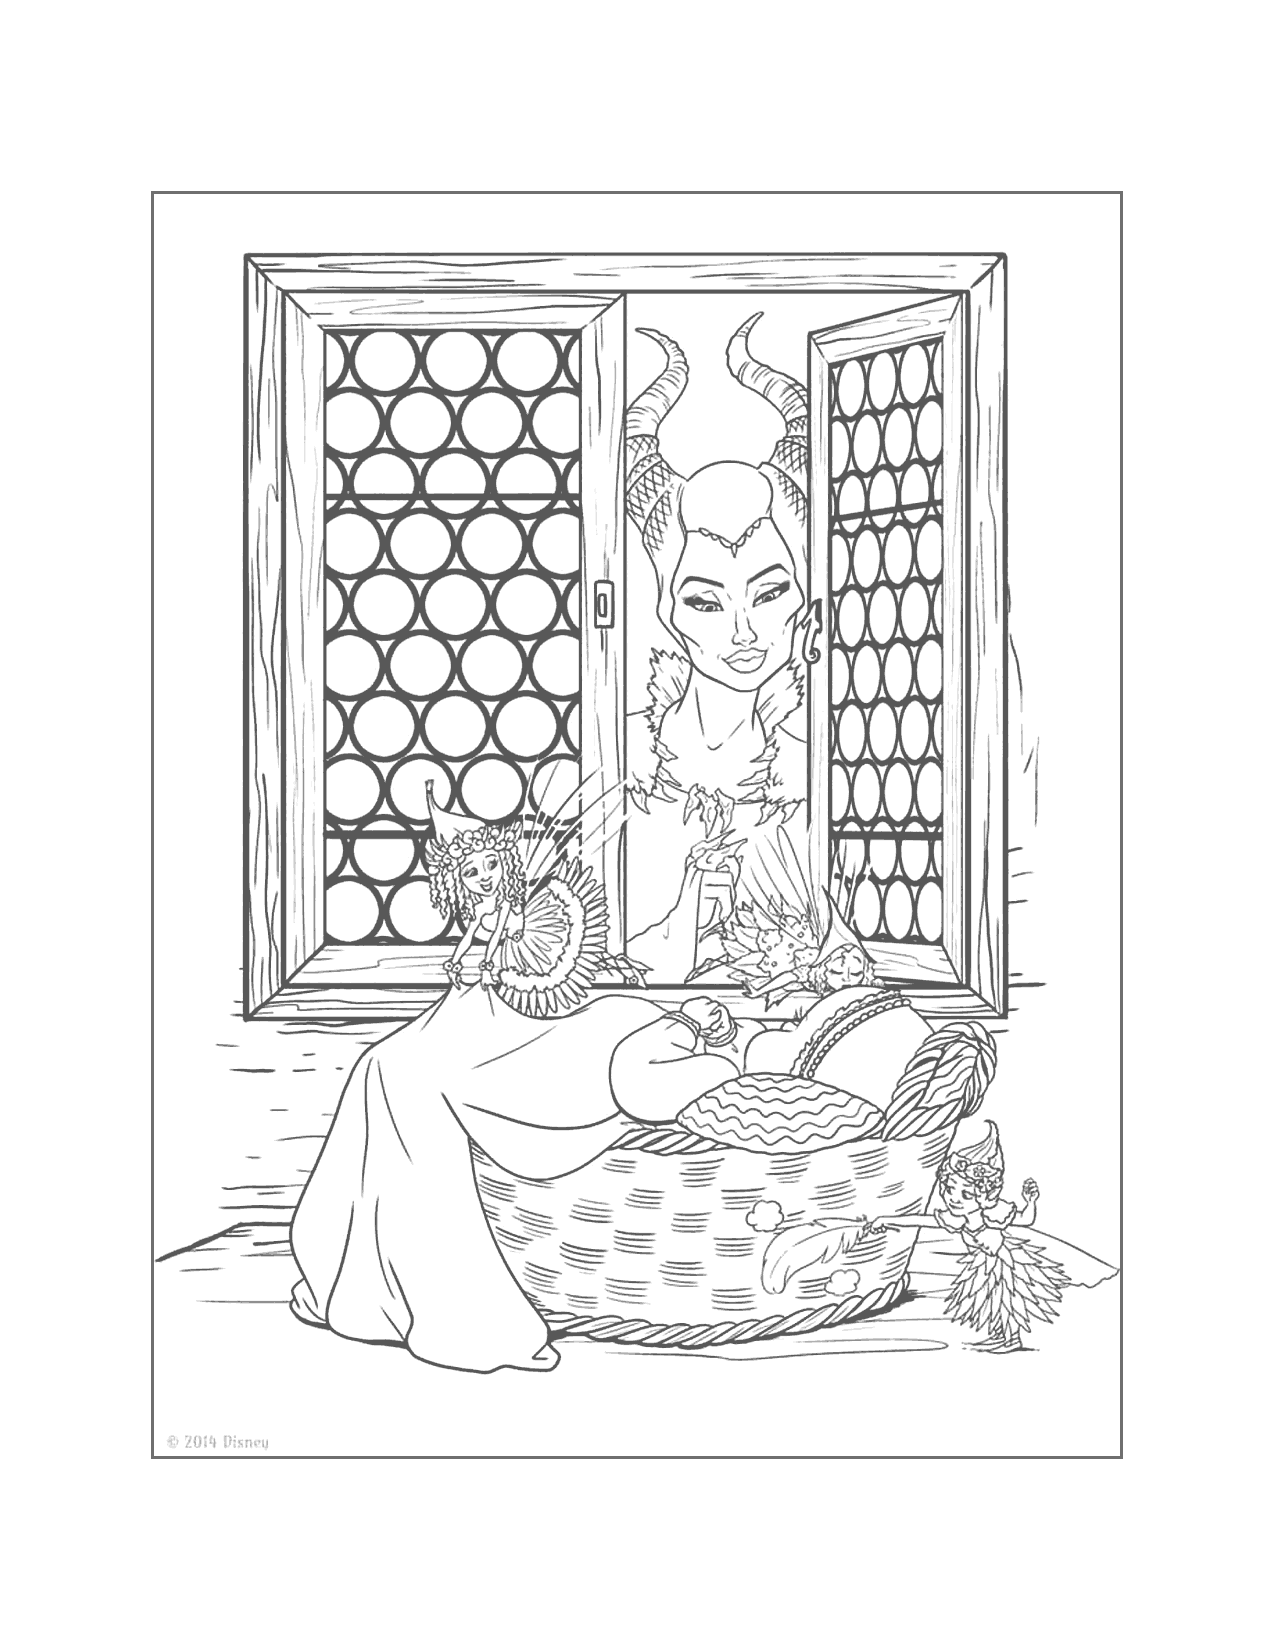 Maleficent Looks In On Aurora Coloring Page